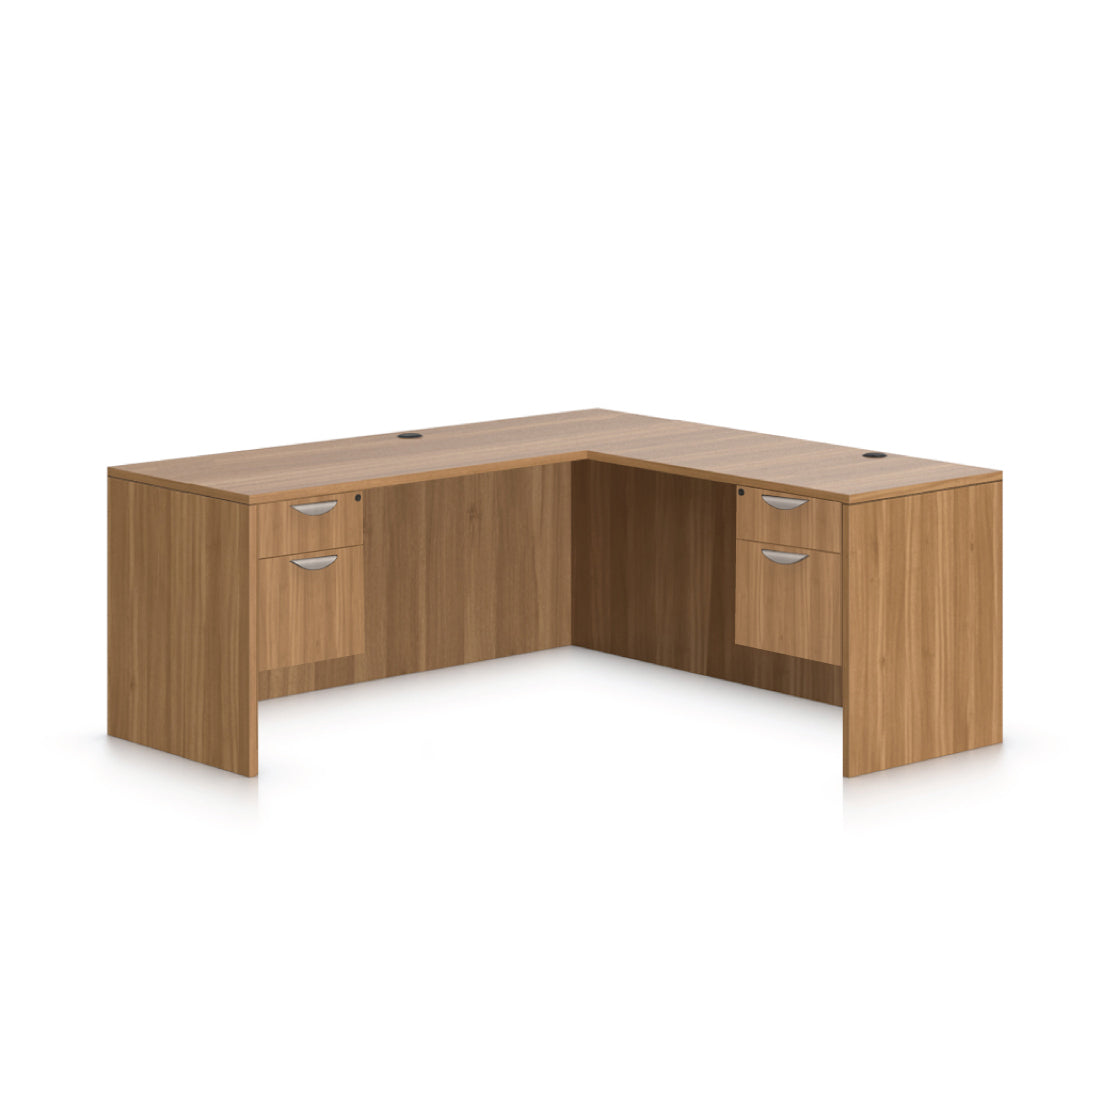 L71C - 6' x 5.5' L-Shape Workstation(Credenza Shell with Two Hanging B/F Pedestal) - Kainosbuy.com